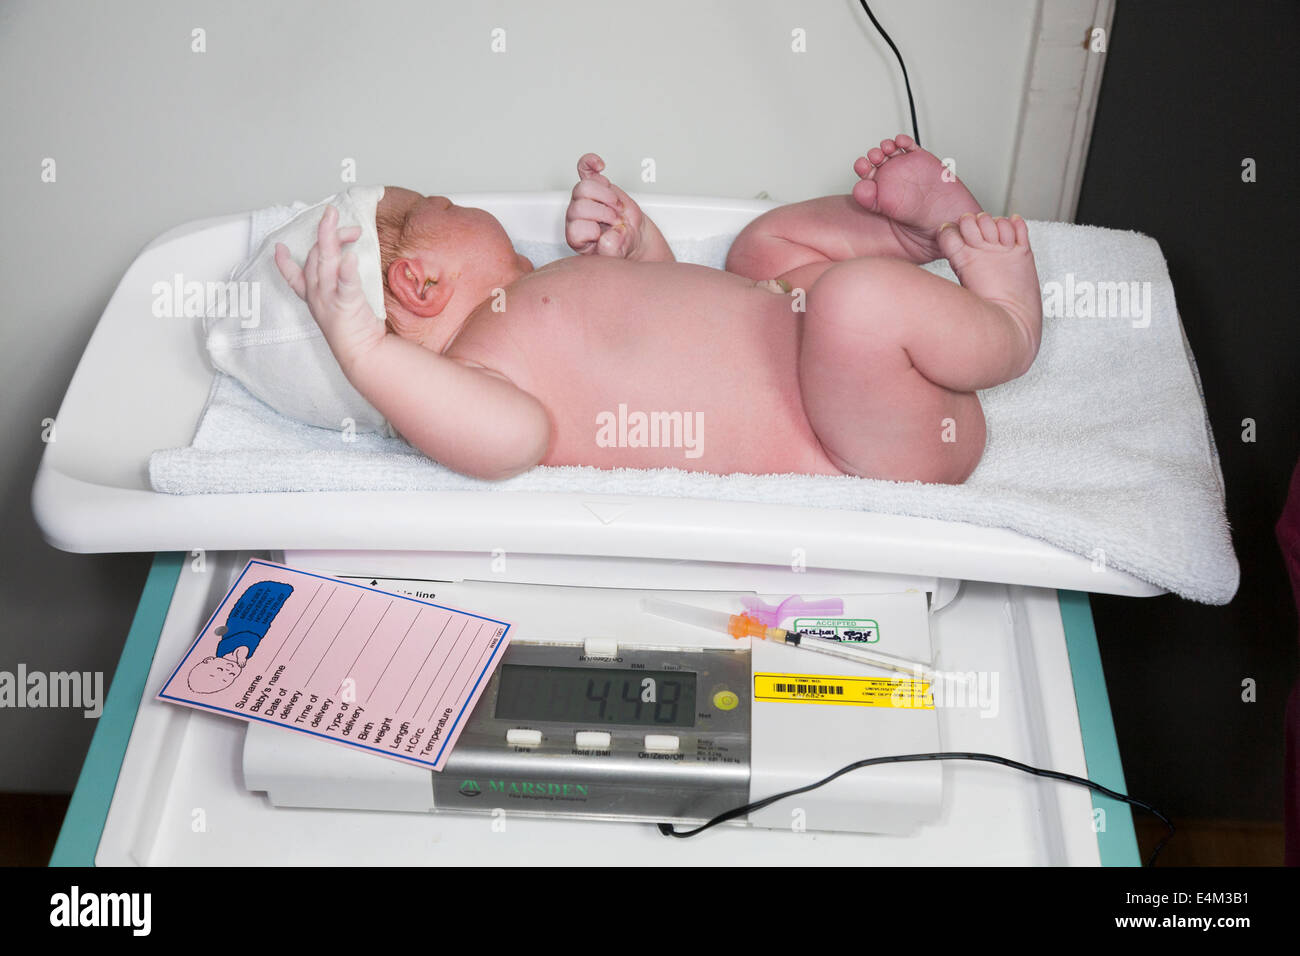 Weighing a newborn / new born baby with weighing scales / scale soon after childbirth / giving birth in an NHS hospital. Stock Photo